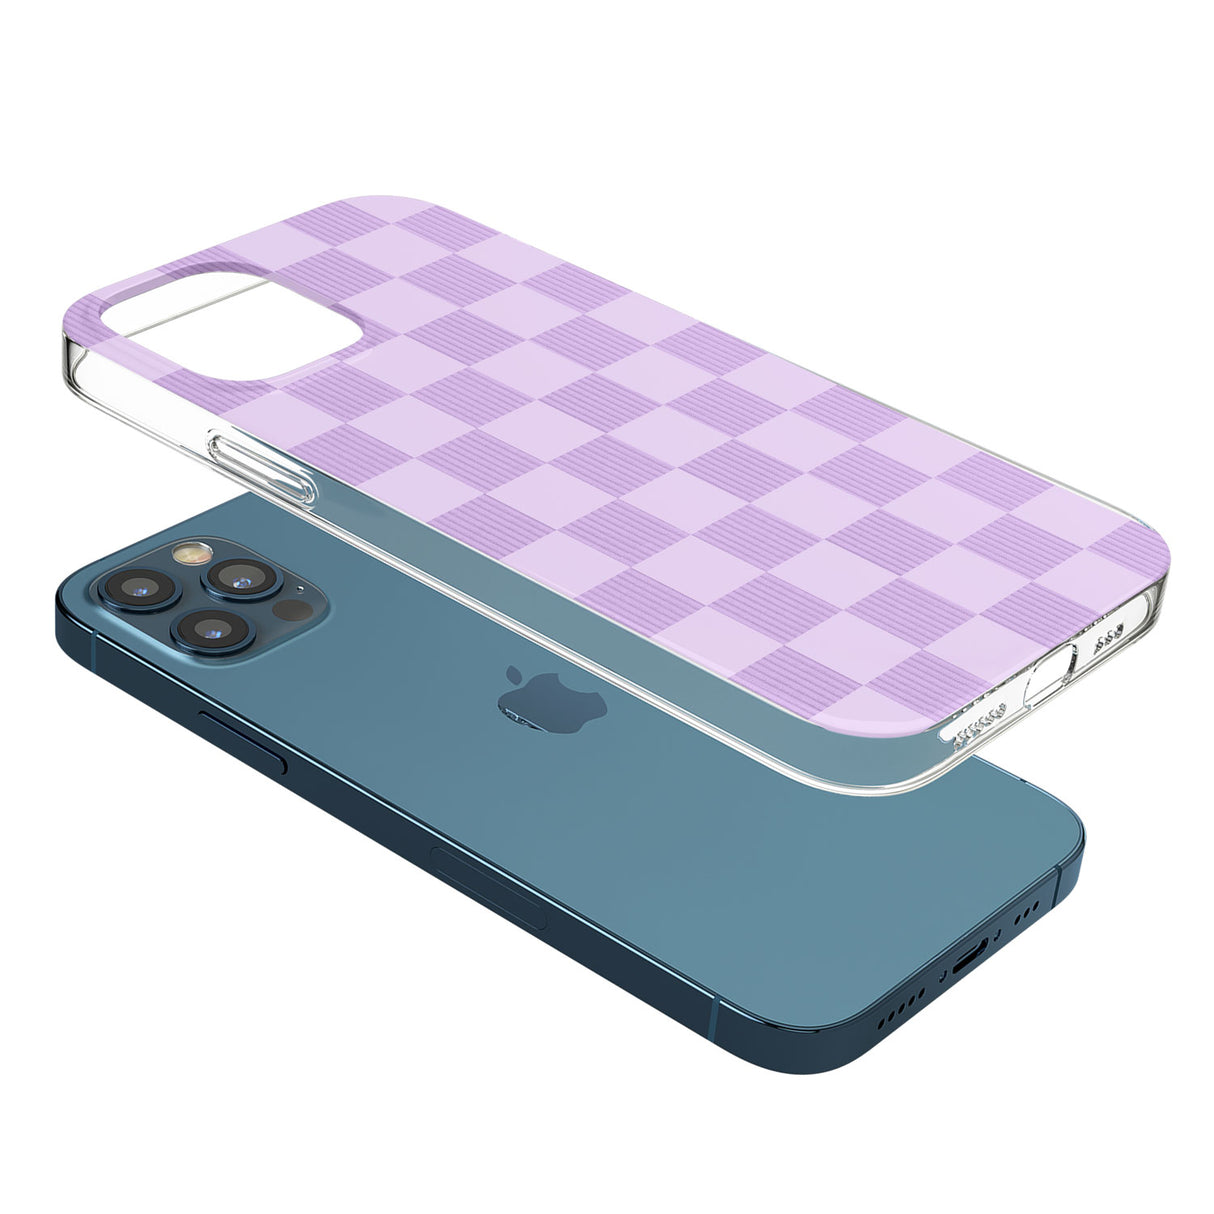 LILAC CHECKERED Phone Case for iPhone 12 Pro